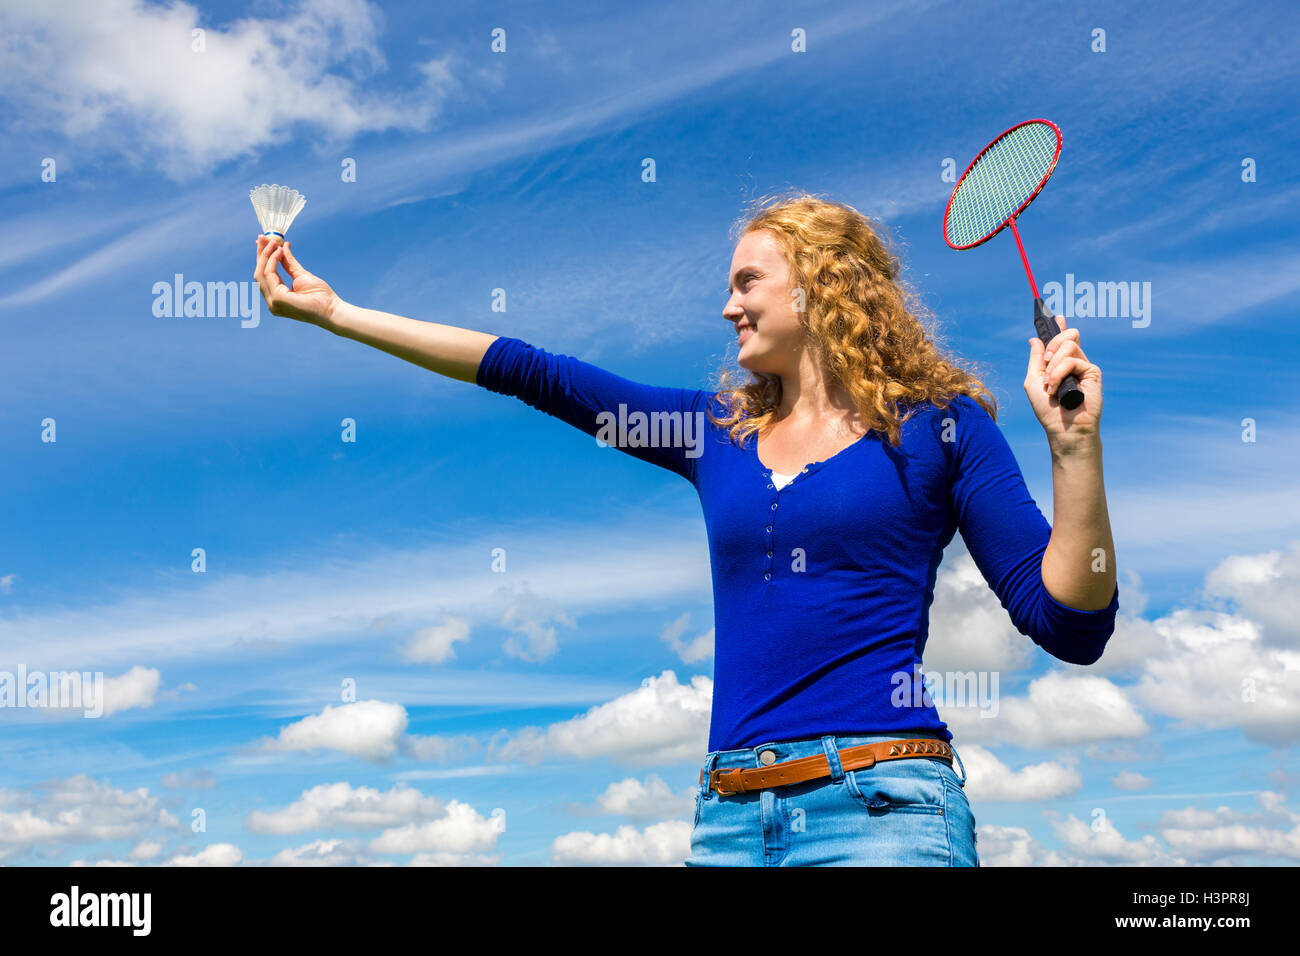 Young caucasian  woman holding shuttle and badminton racket against blue sky with white clouds Stock Photo